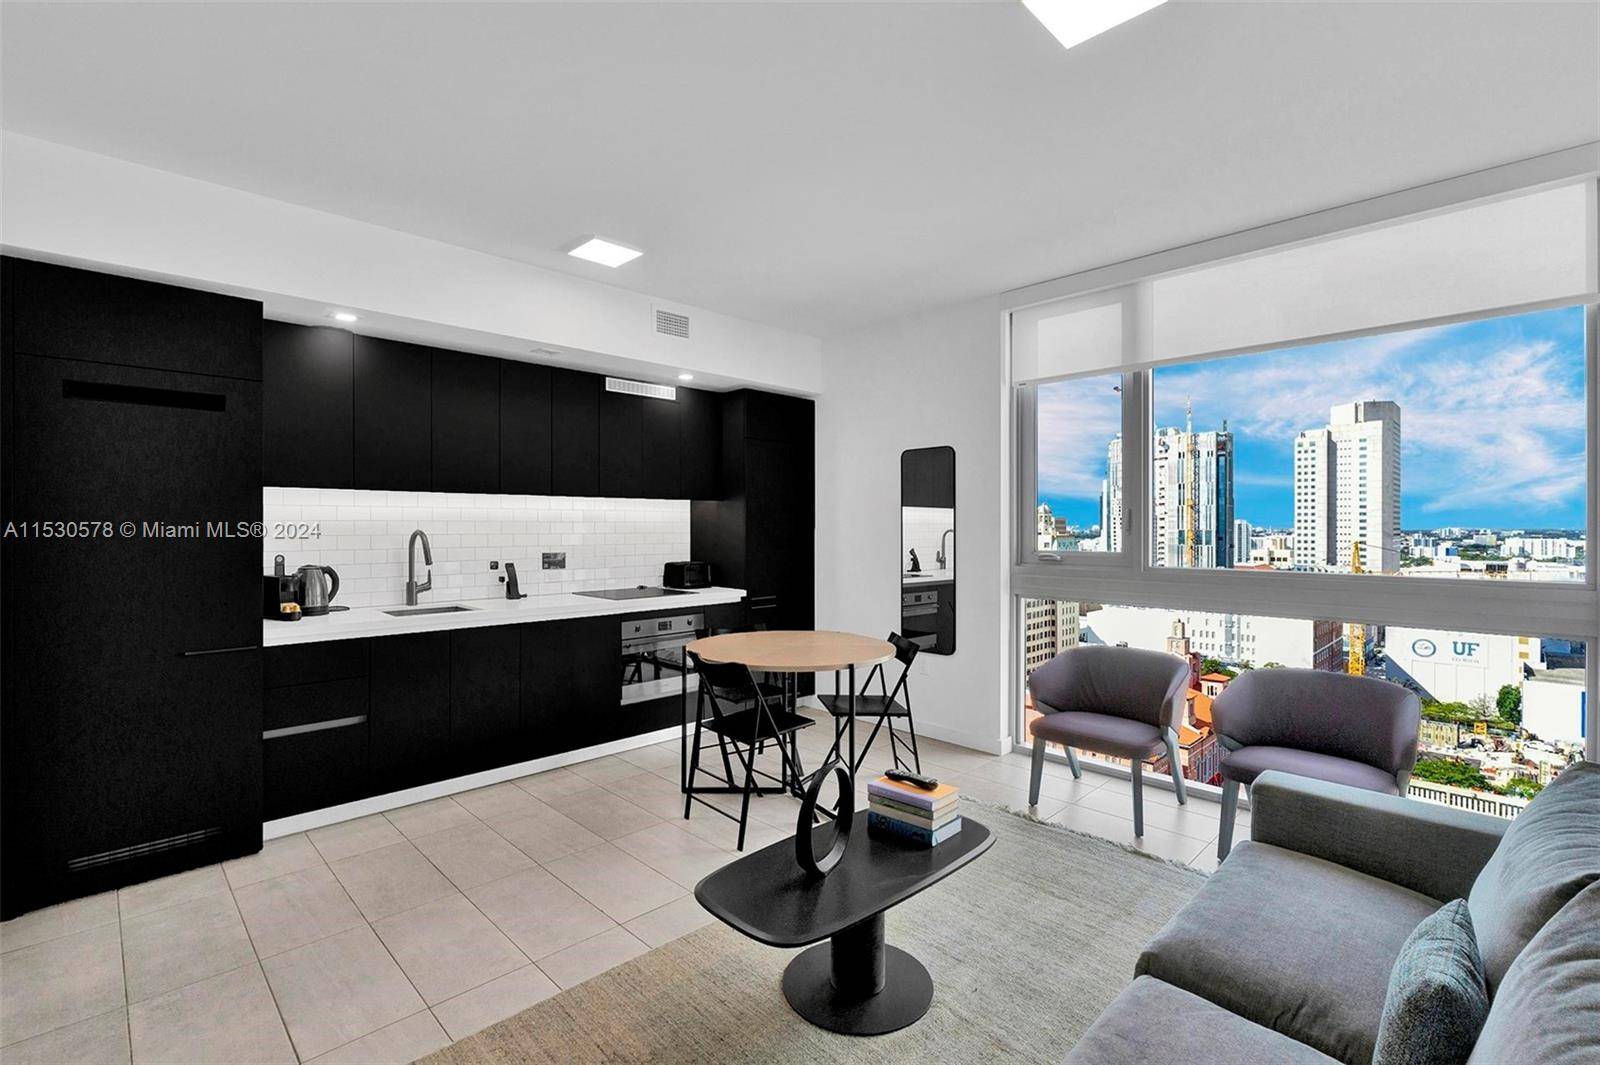 A beautiful, fully furnished, turnkey 2 bedroom unit located in the heart of Downtown Miami.